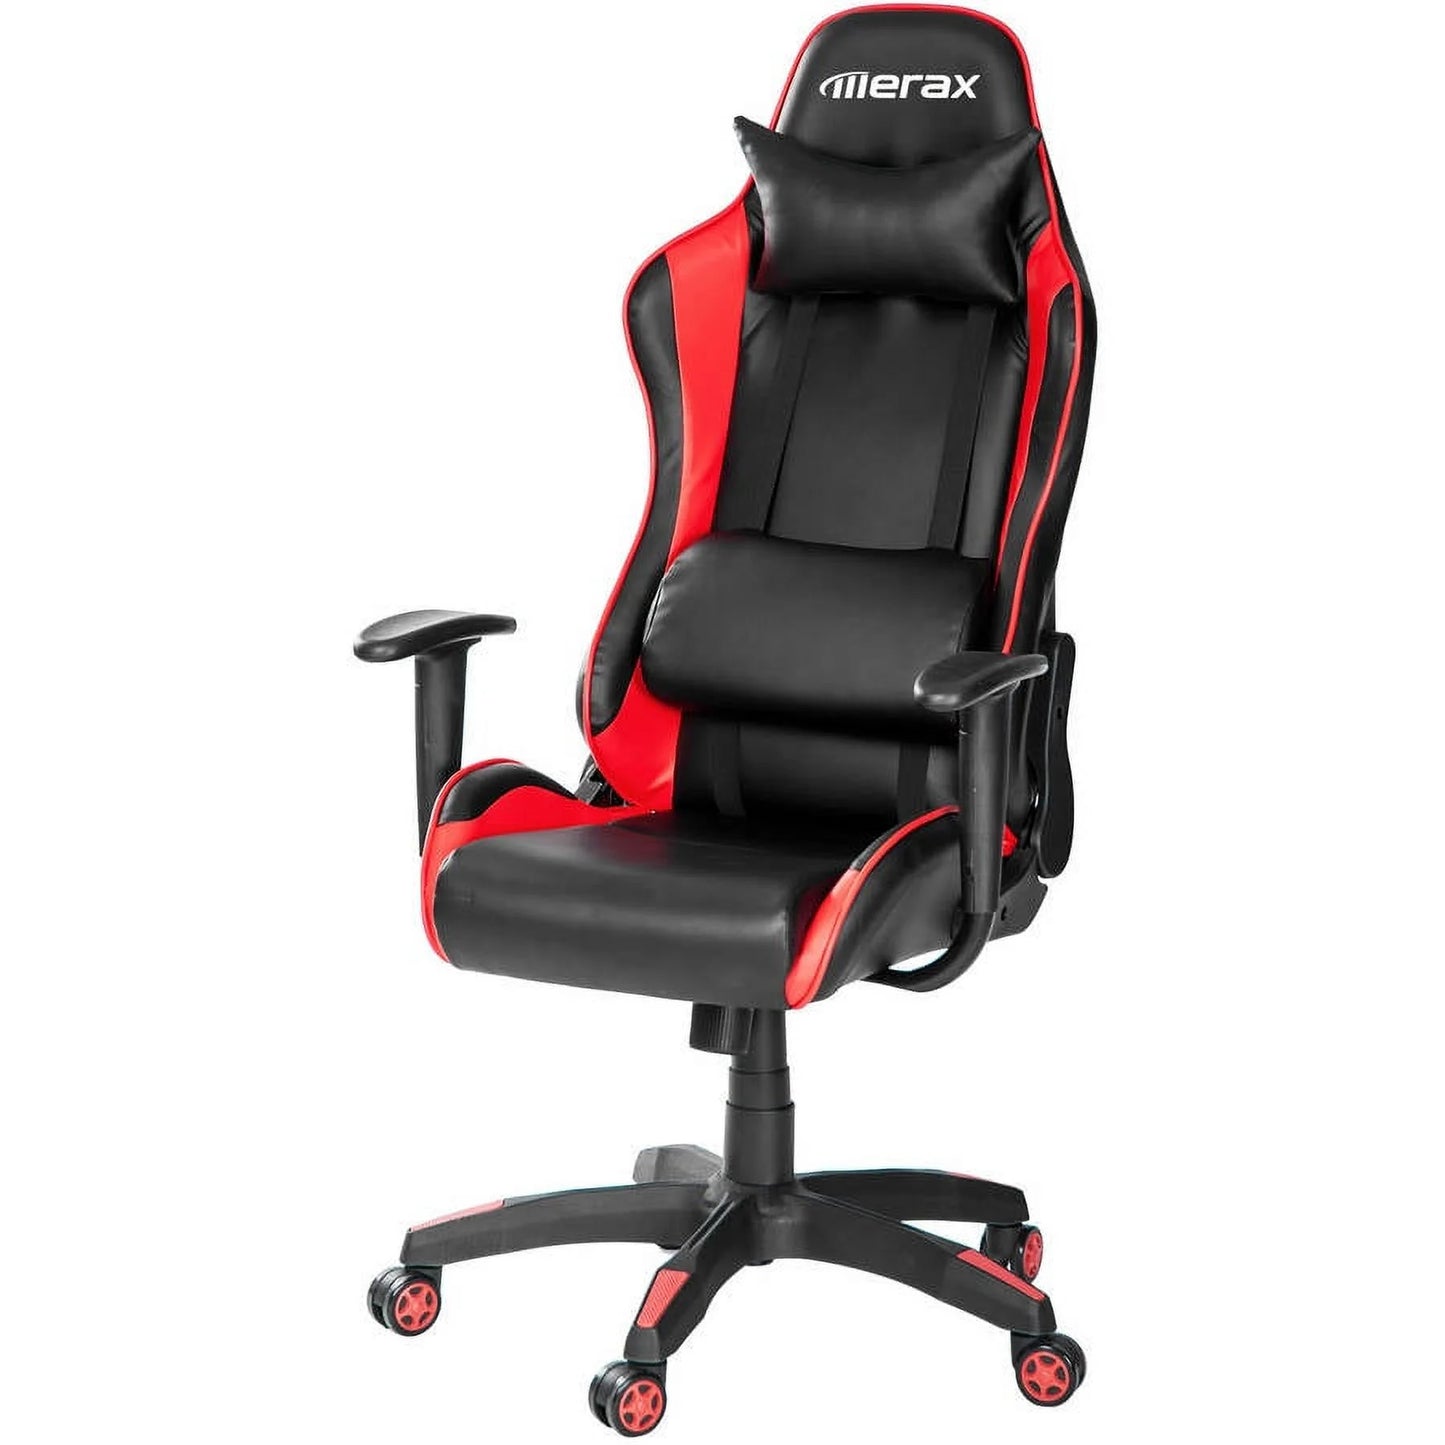 Merax Executive Home Office Chair Racing Style Gaming Chair PU Leather Swivel Computer and Office Desk Chair (red)